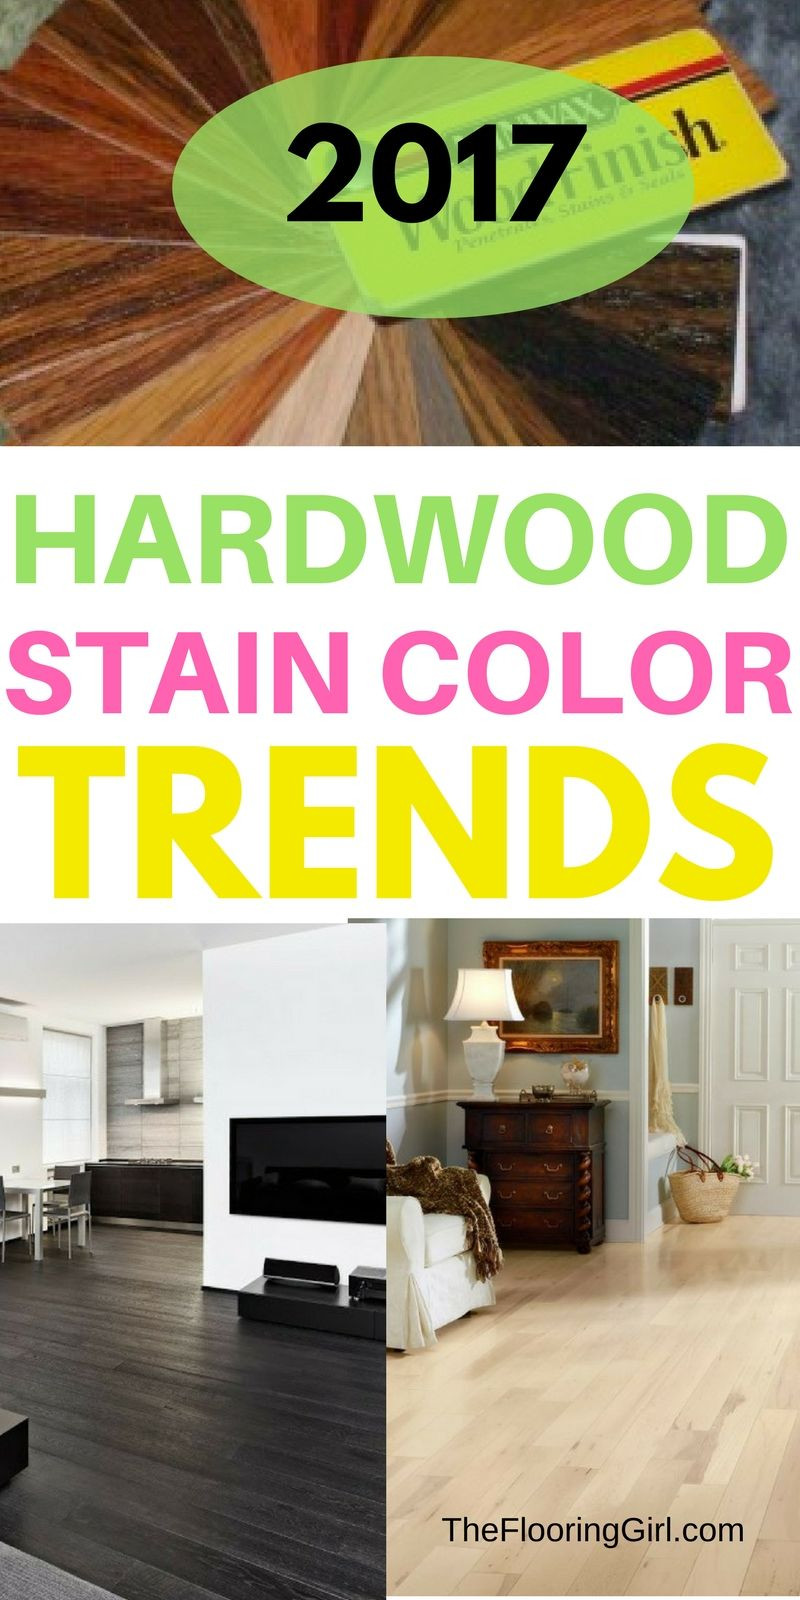 14 Fantastic Water Based Hardwood Floor Finish 2024 free download water based hardwood floor finish of hardwood flooring stain color trends 2018 more from the flooring intended for hardwood flooring stain color trends for 2017 hardwood colors that are in s